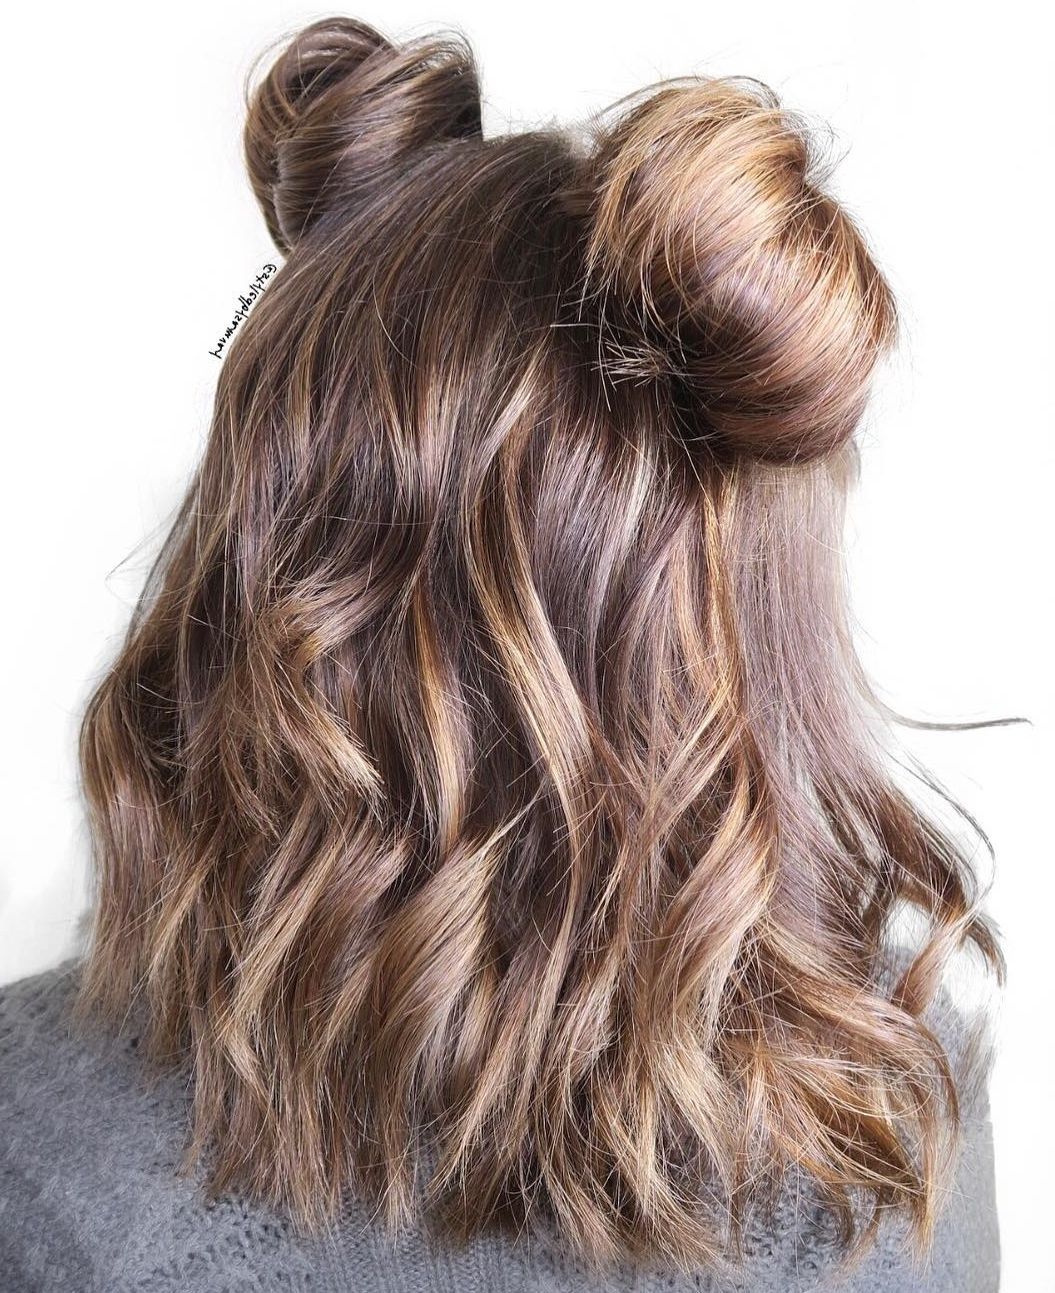 25 Must Try Medium Length Layered Haircuts For 2022 Intended For Newest Layered Medium Length Hairstyles With Space Buns (View 17 of 25)